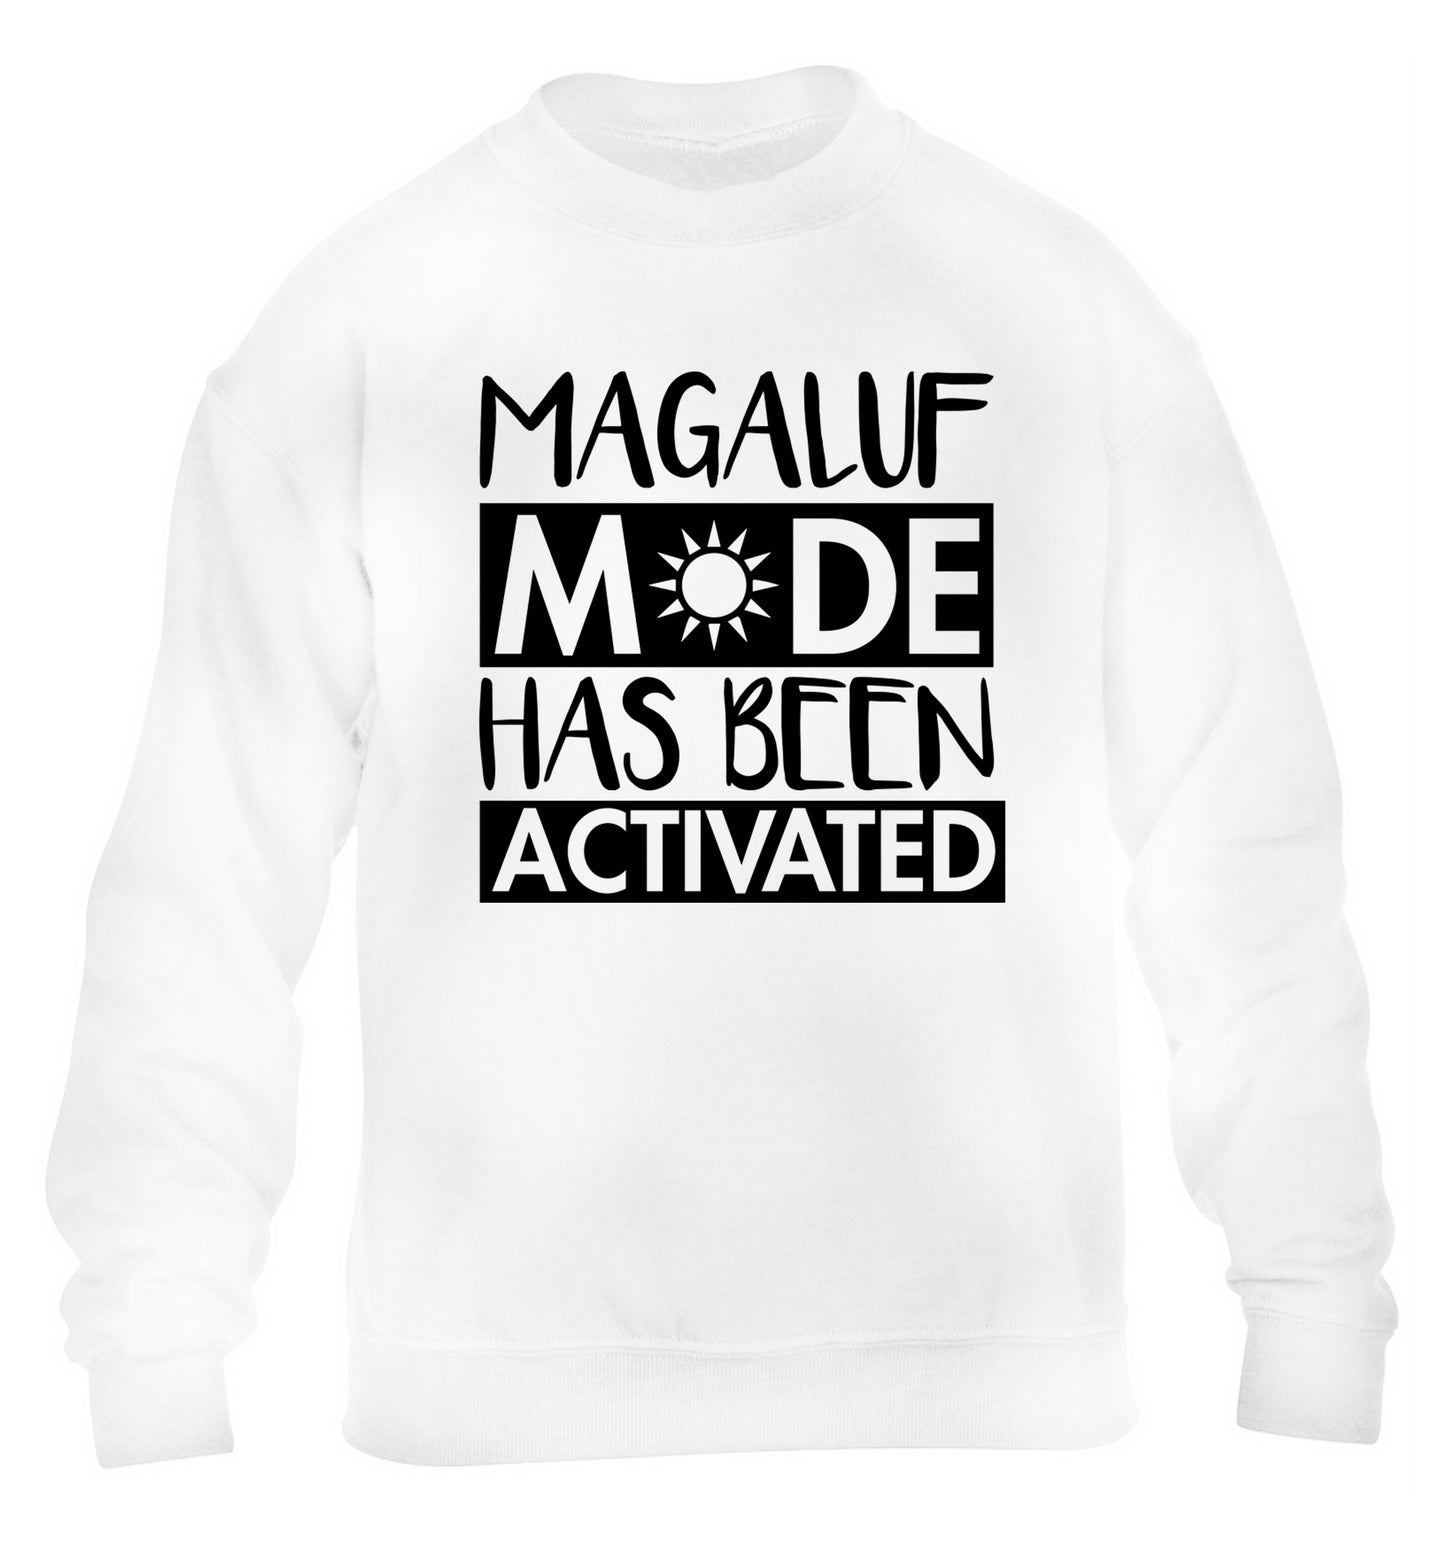 Magaluf mode has been activated children's white sweater 12-13 Years